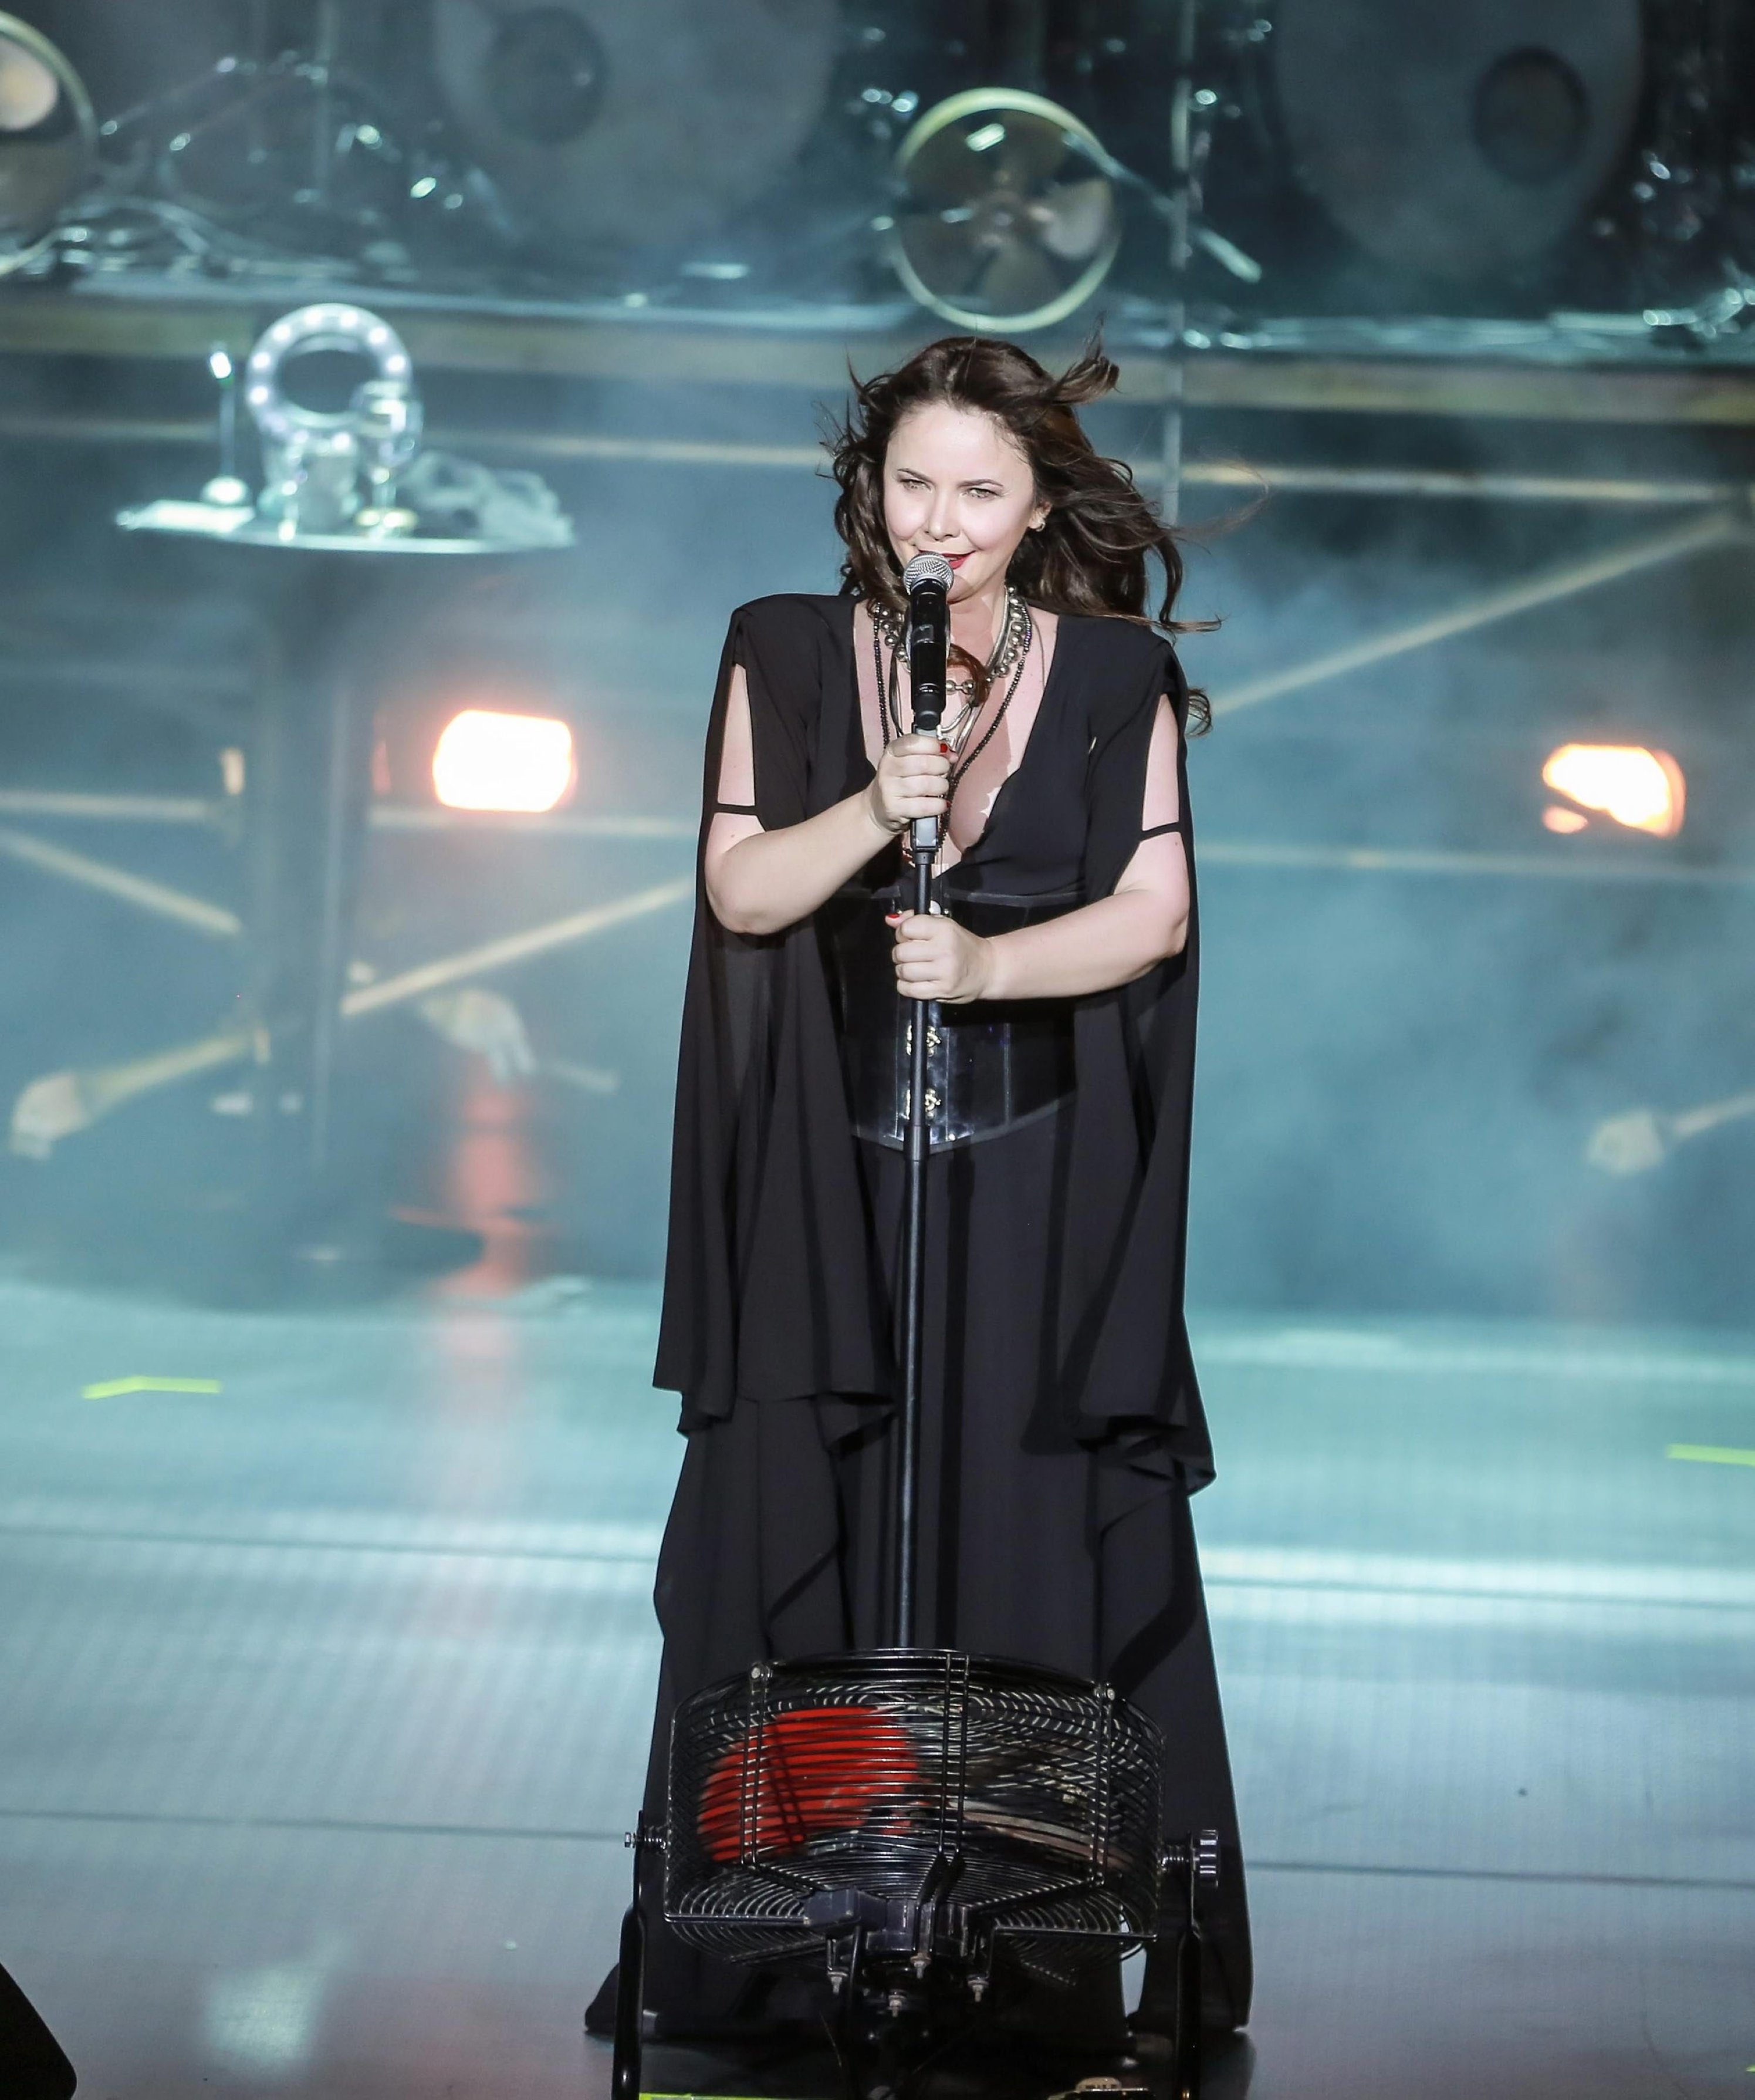 Şebnem Ferah performs at Cemil Topuzlu Open Air Theater, Istanbul, Turkey.  (File photos)